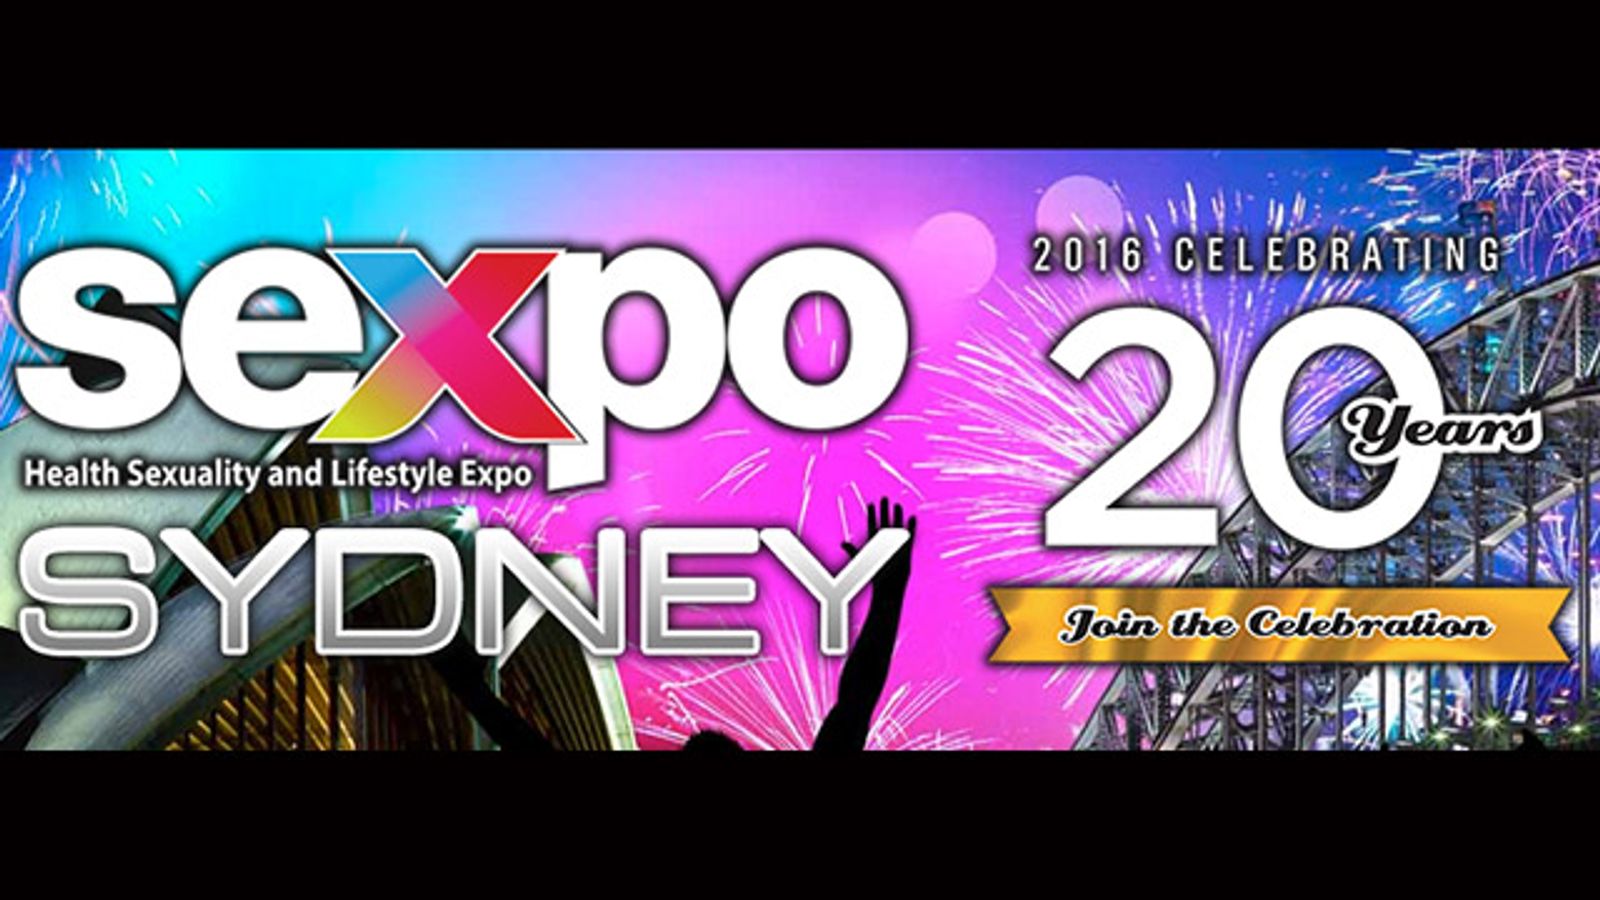 Sexpo Returning to Sydney For 20th Anniversary May 12-15